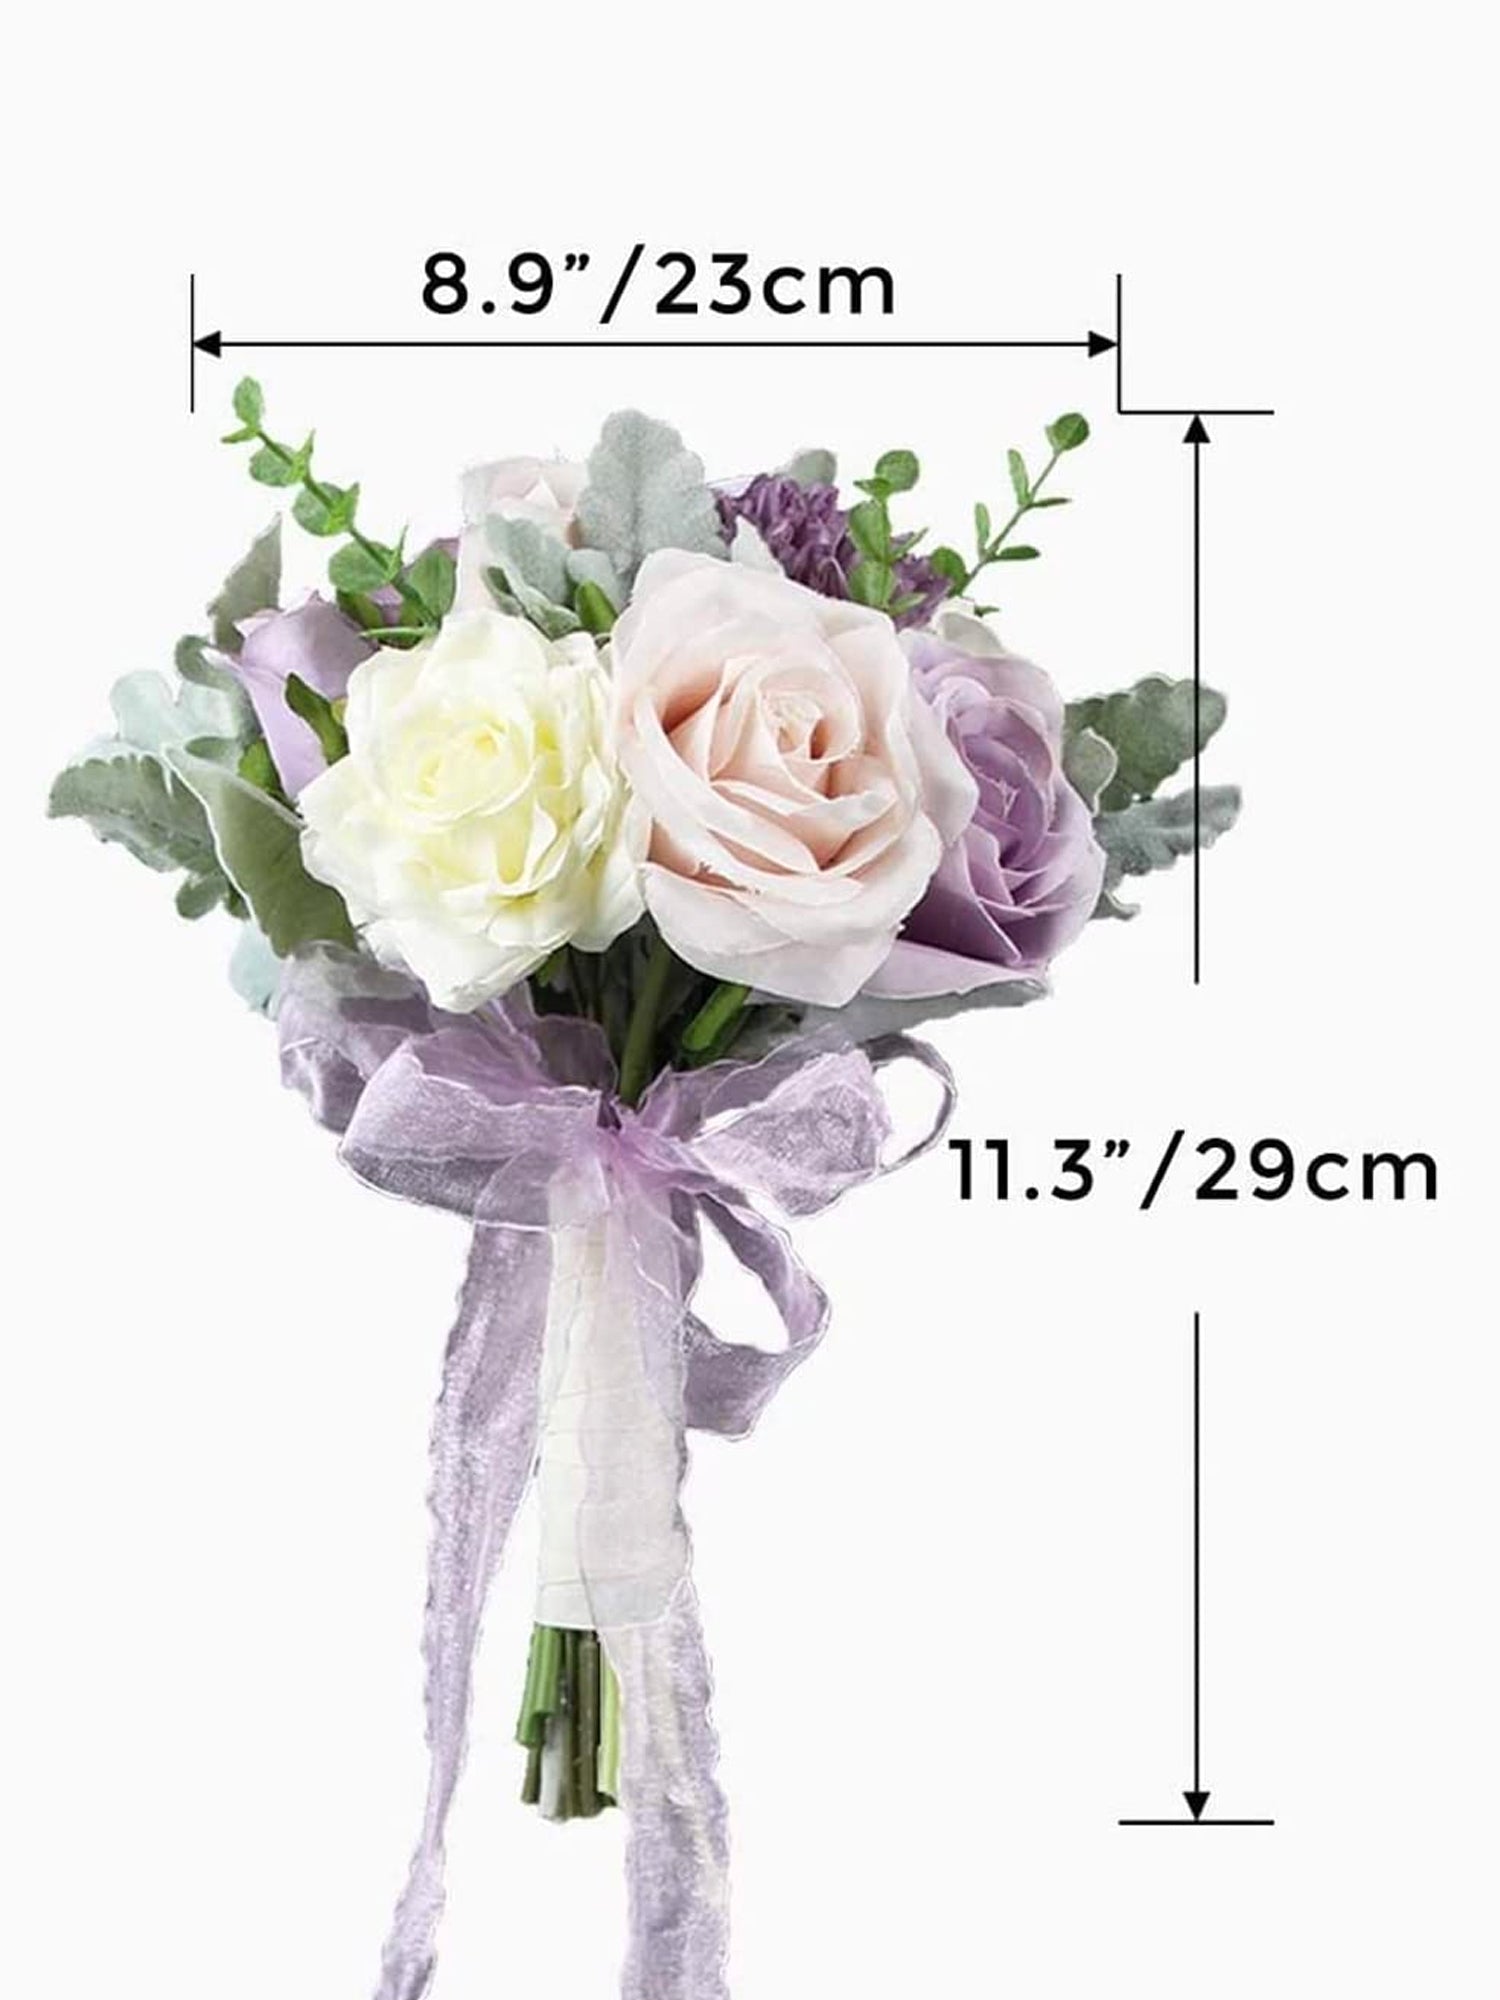 8.9 inch wide Pastel Purple Rounded Bridal Bouquet - Rinlong Flower